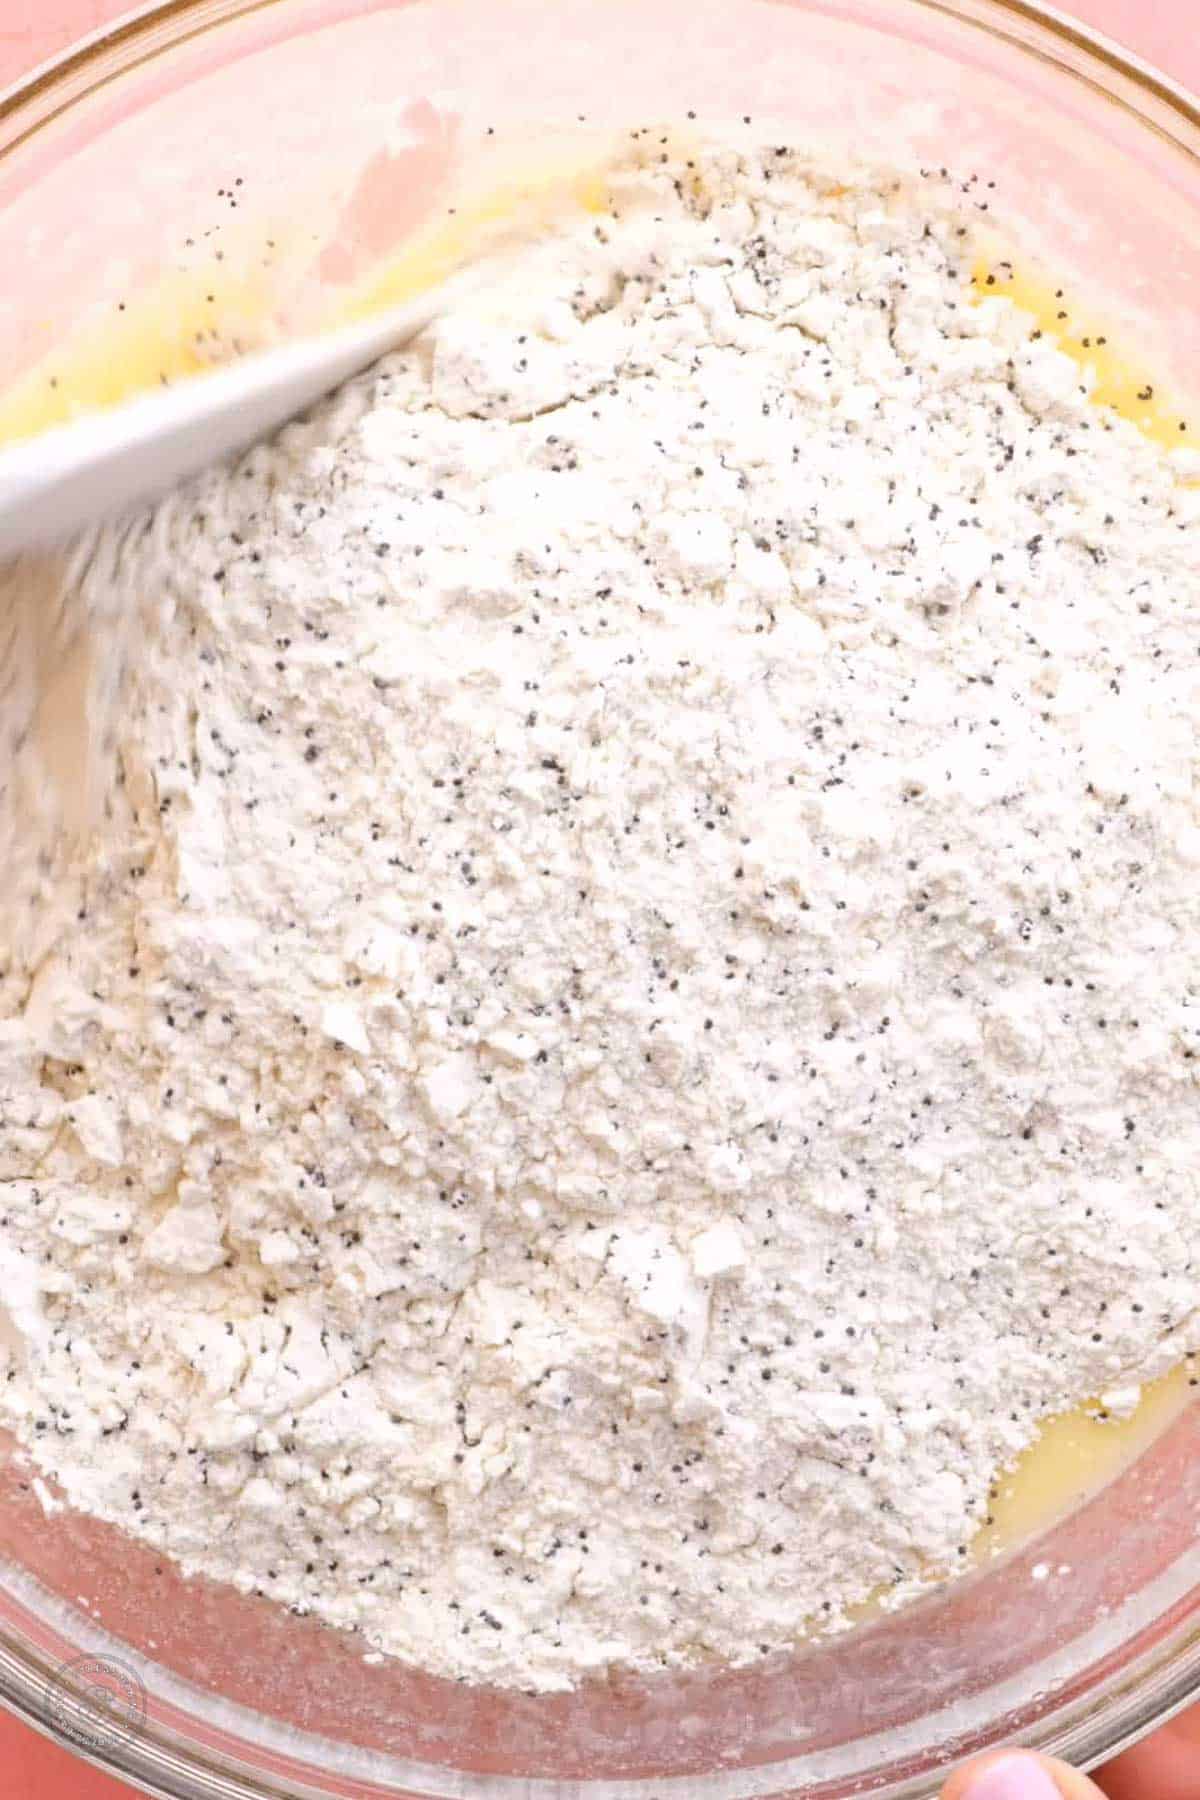 Dry ingredients being folded into a yellow batter with a white spatula